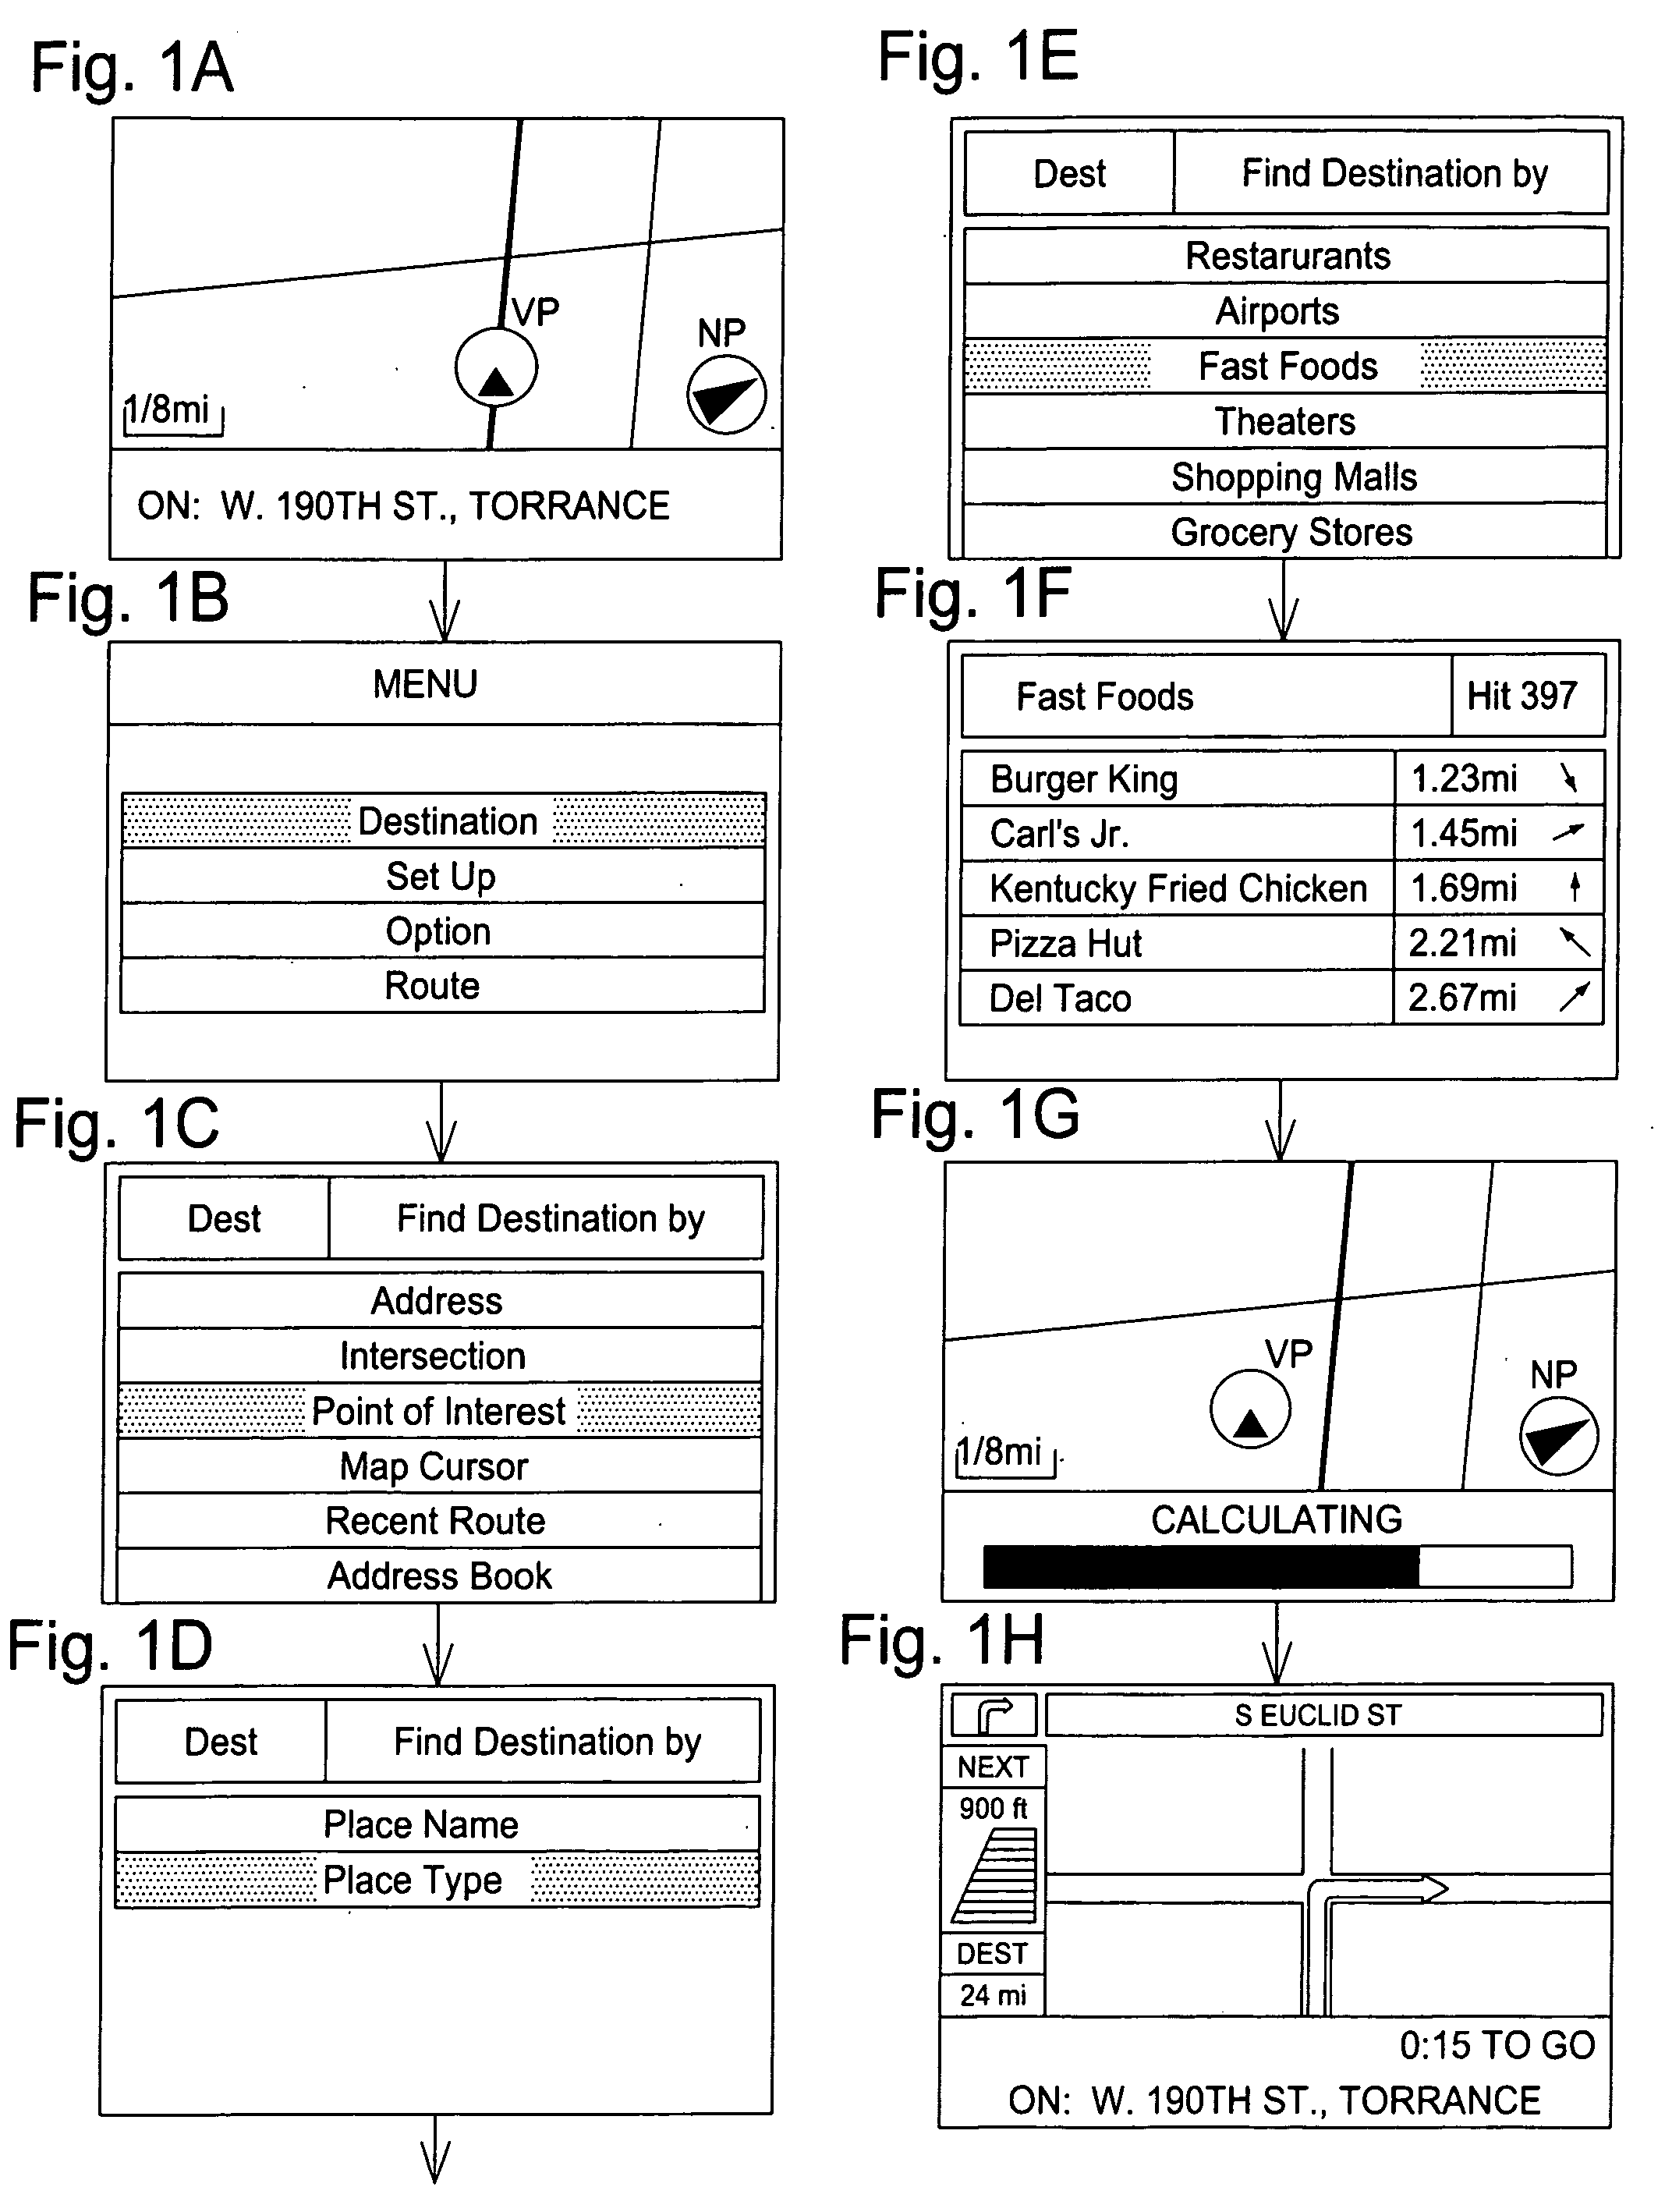 Method and apparatus for selecting absolute location on three-dimensional image on navigation display